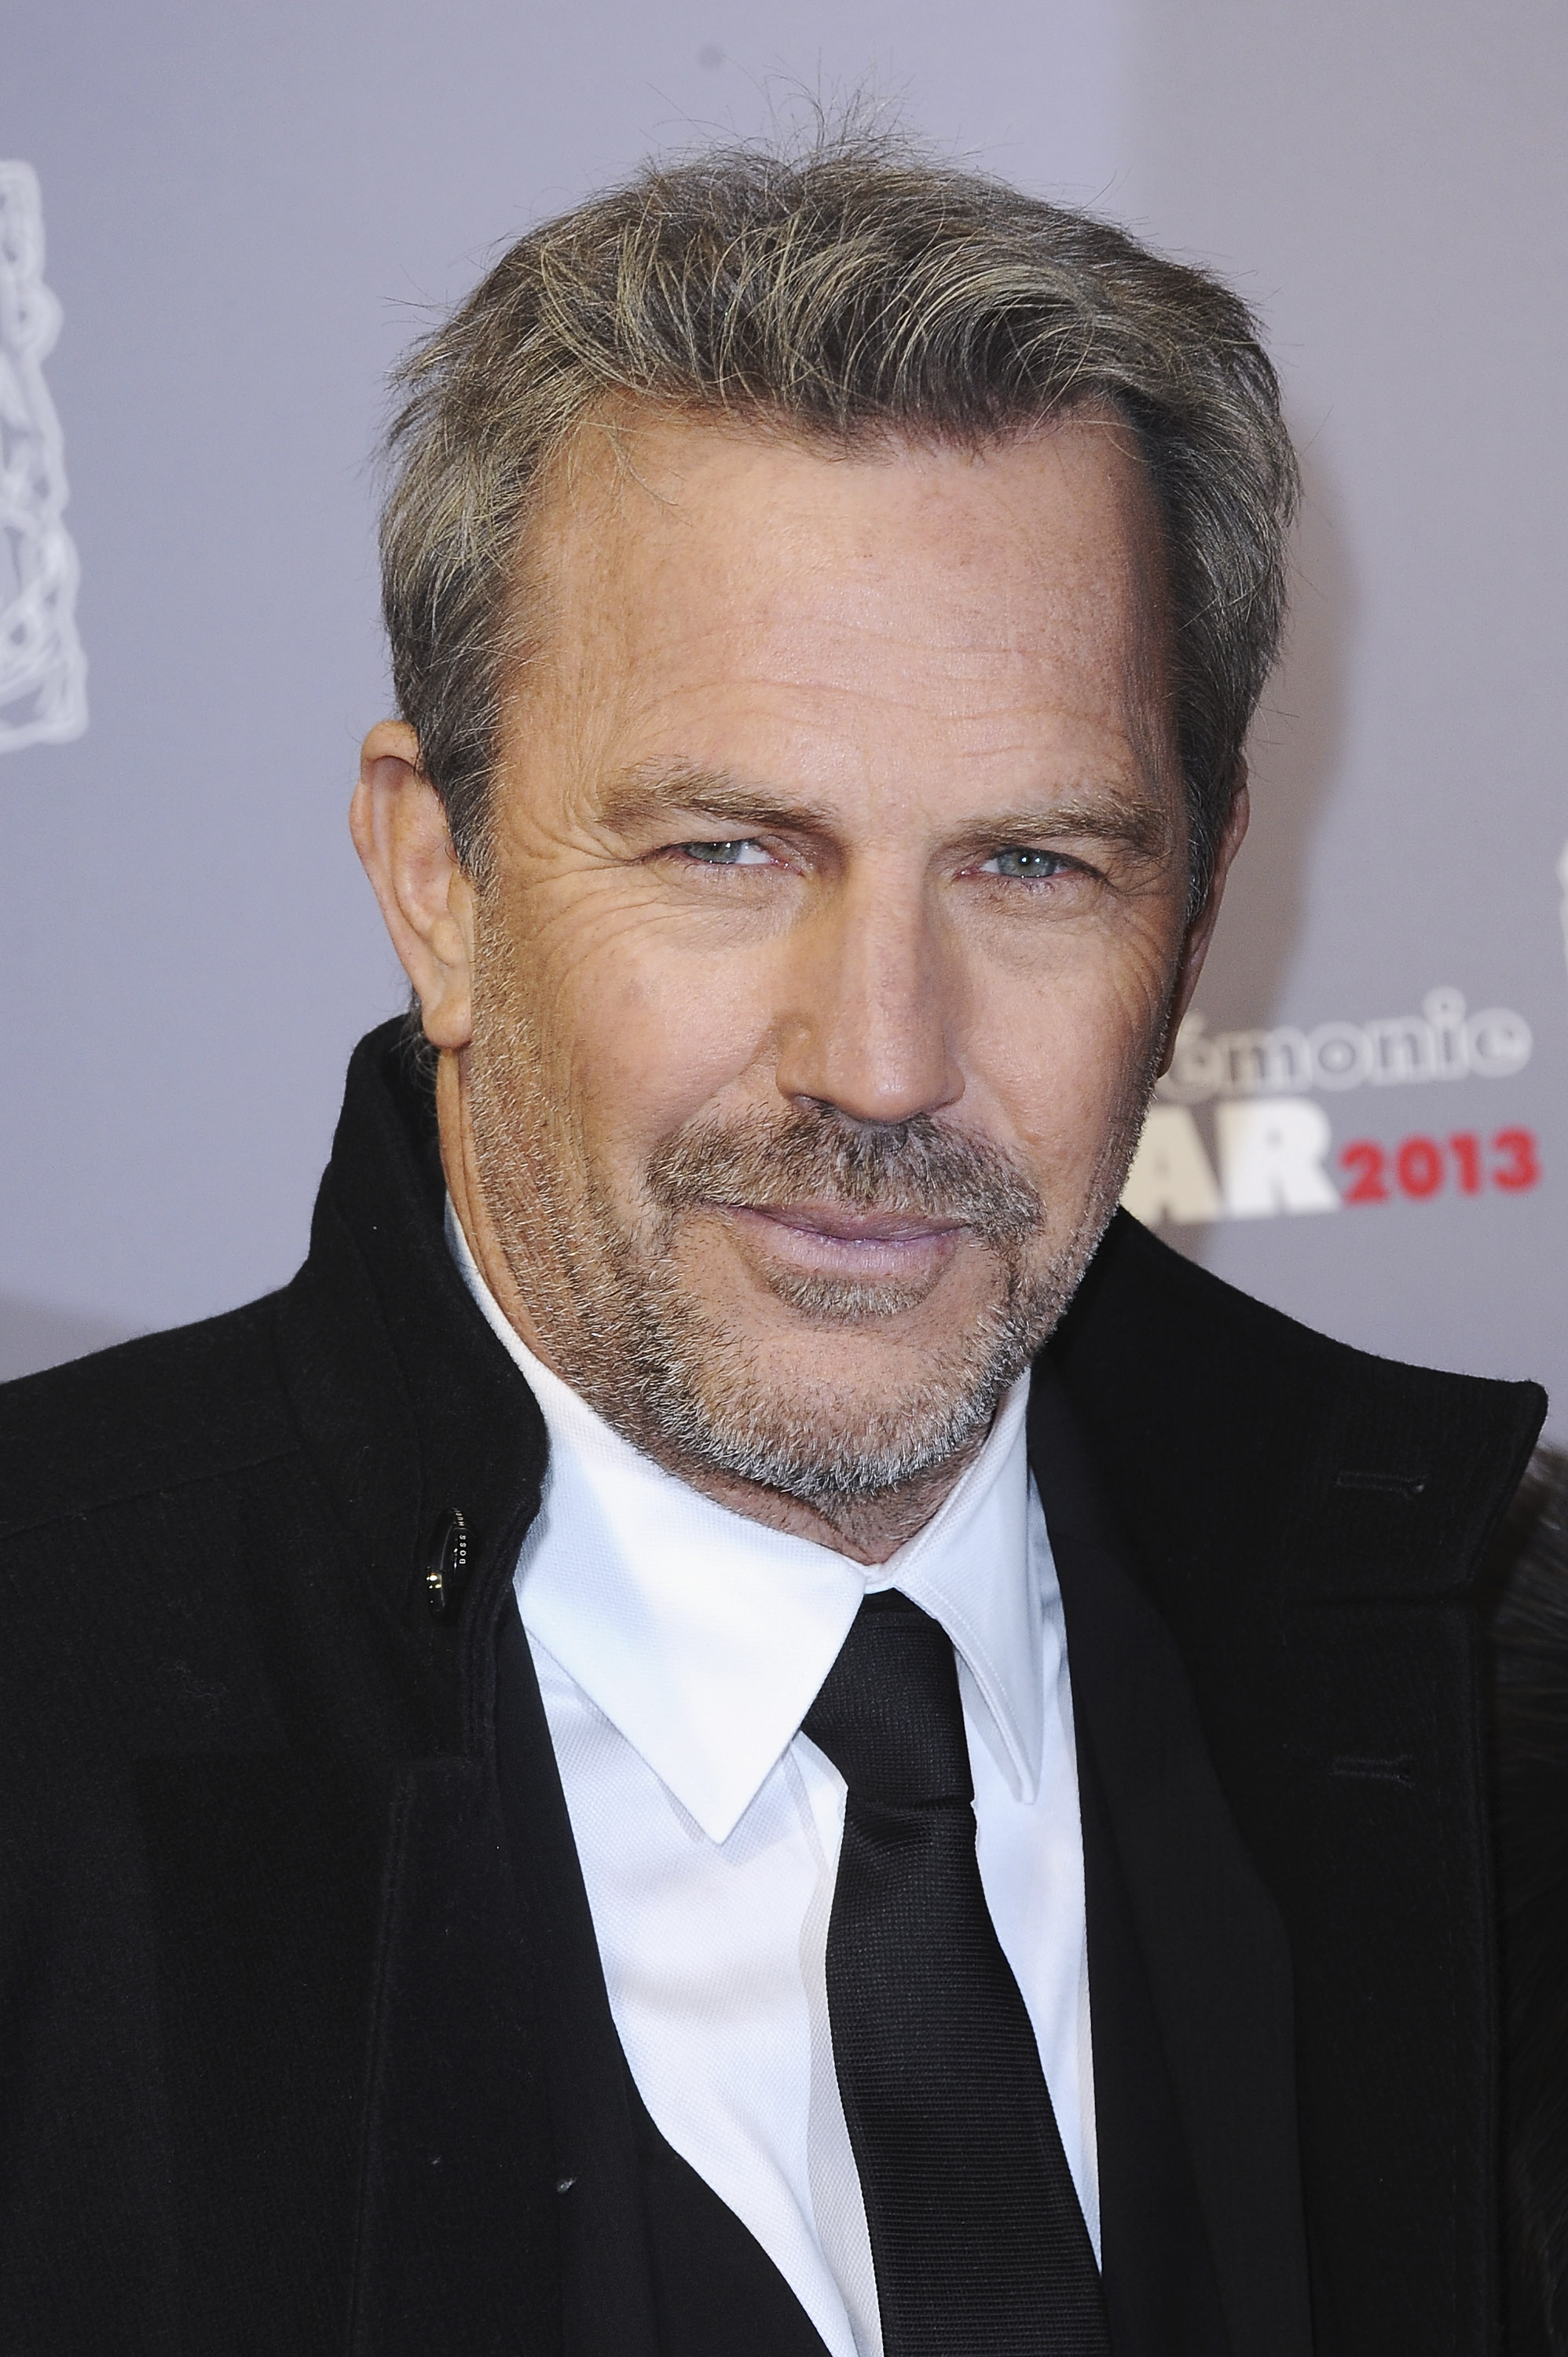 Kevin Costner at the 2013 Cesar Film Awards on February 22, 2013, in Paris, France. | Source: Getty Images